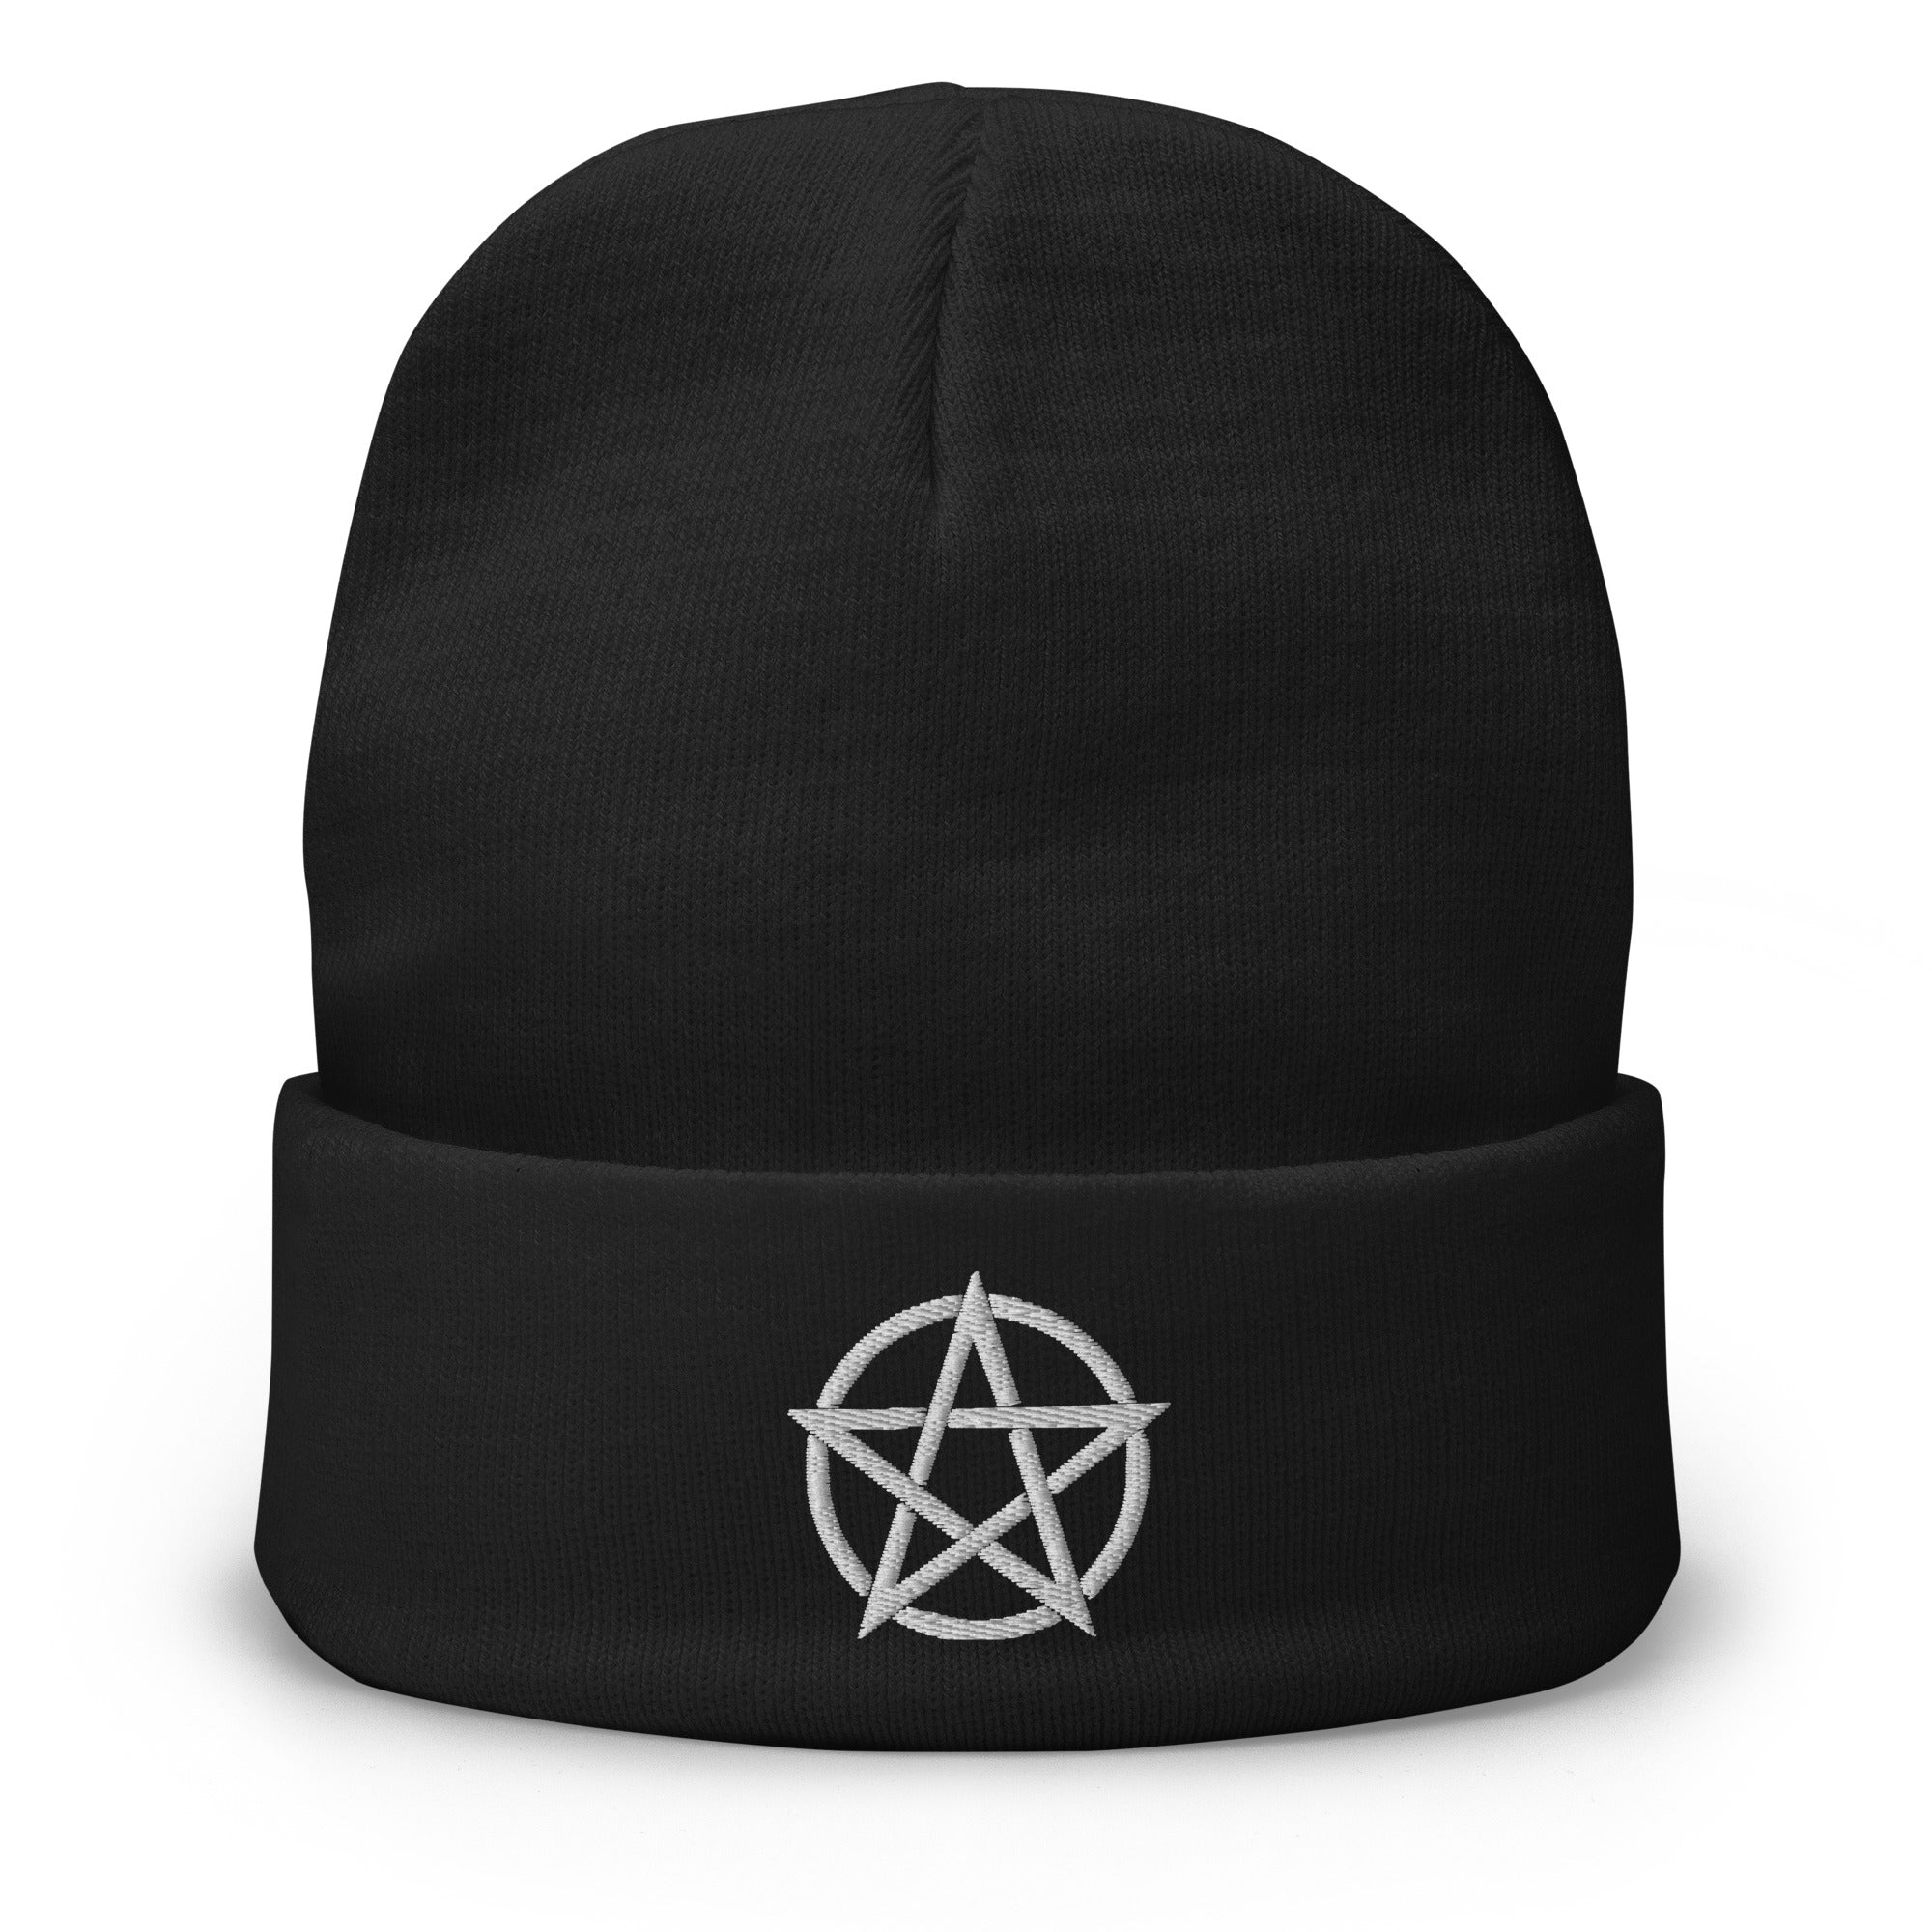 Witchcraft Woven Pentacle Pagan Ritual Embroidered Cuff Beanie Pentagram - Edge of Life Designs